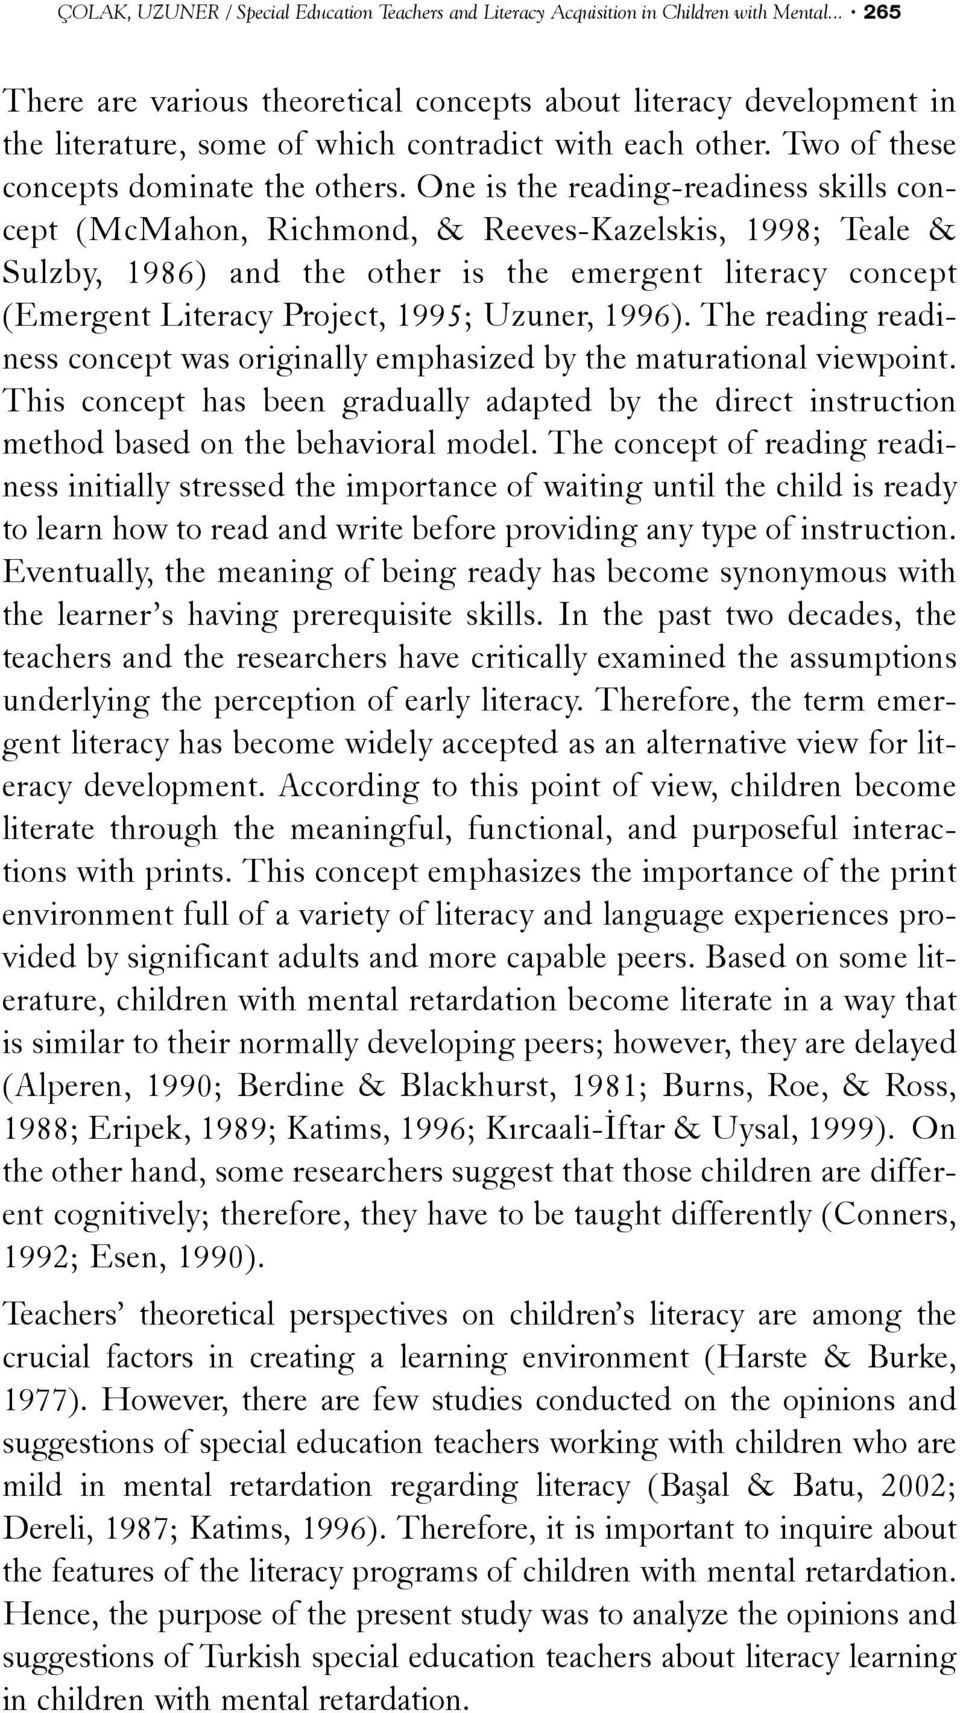 One is the reading-readiness skills concept (McMahon, Richmond, & Reeves-Kazelskis, 1998; Teale & Sulzby, 1986) and the other is the emergent literacy concept (Emergent Literacy Project, 1995;